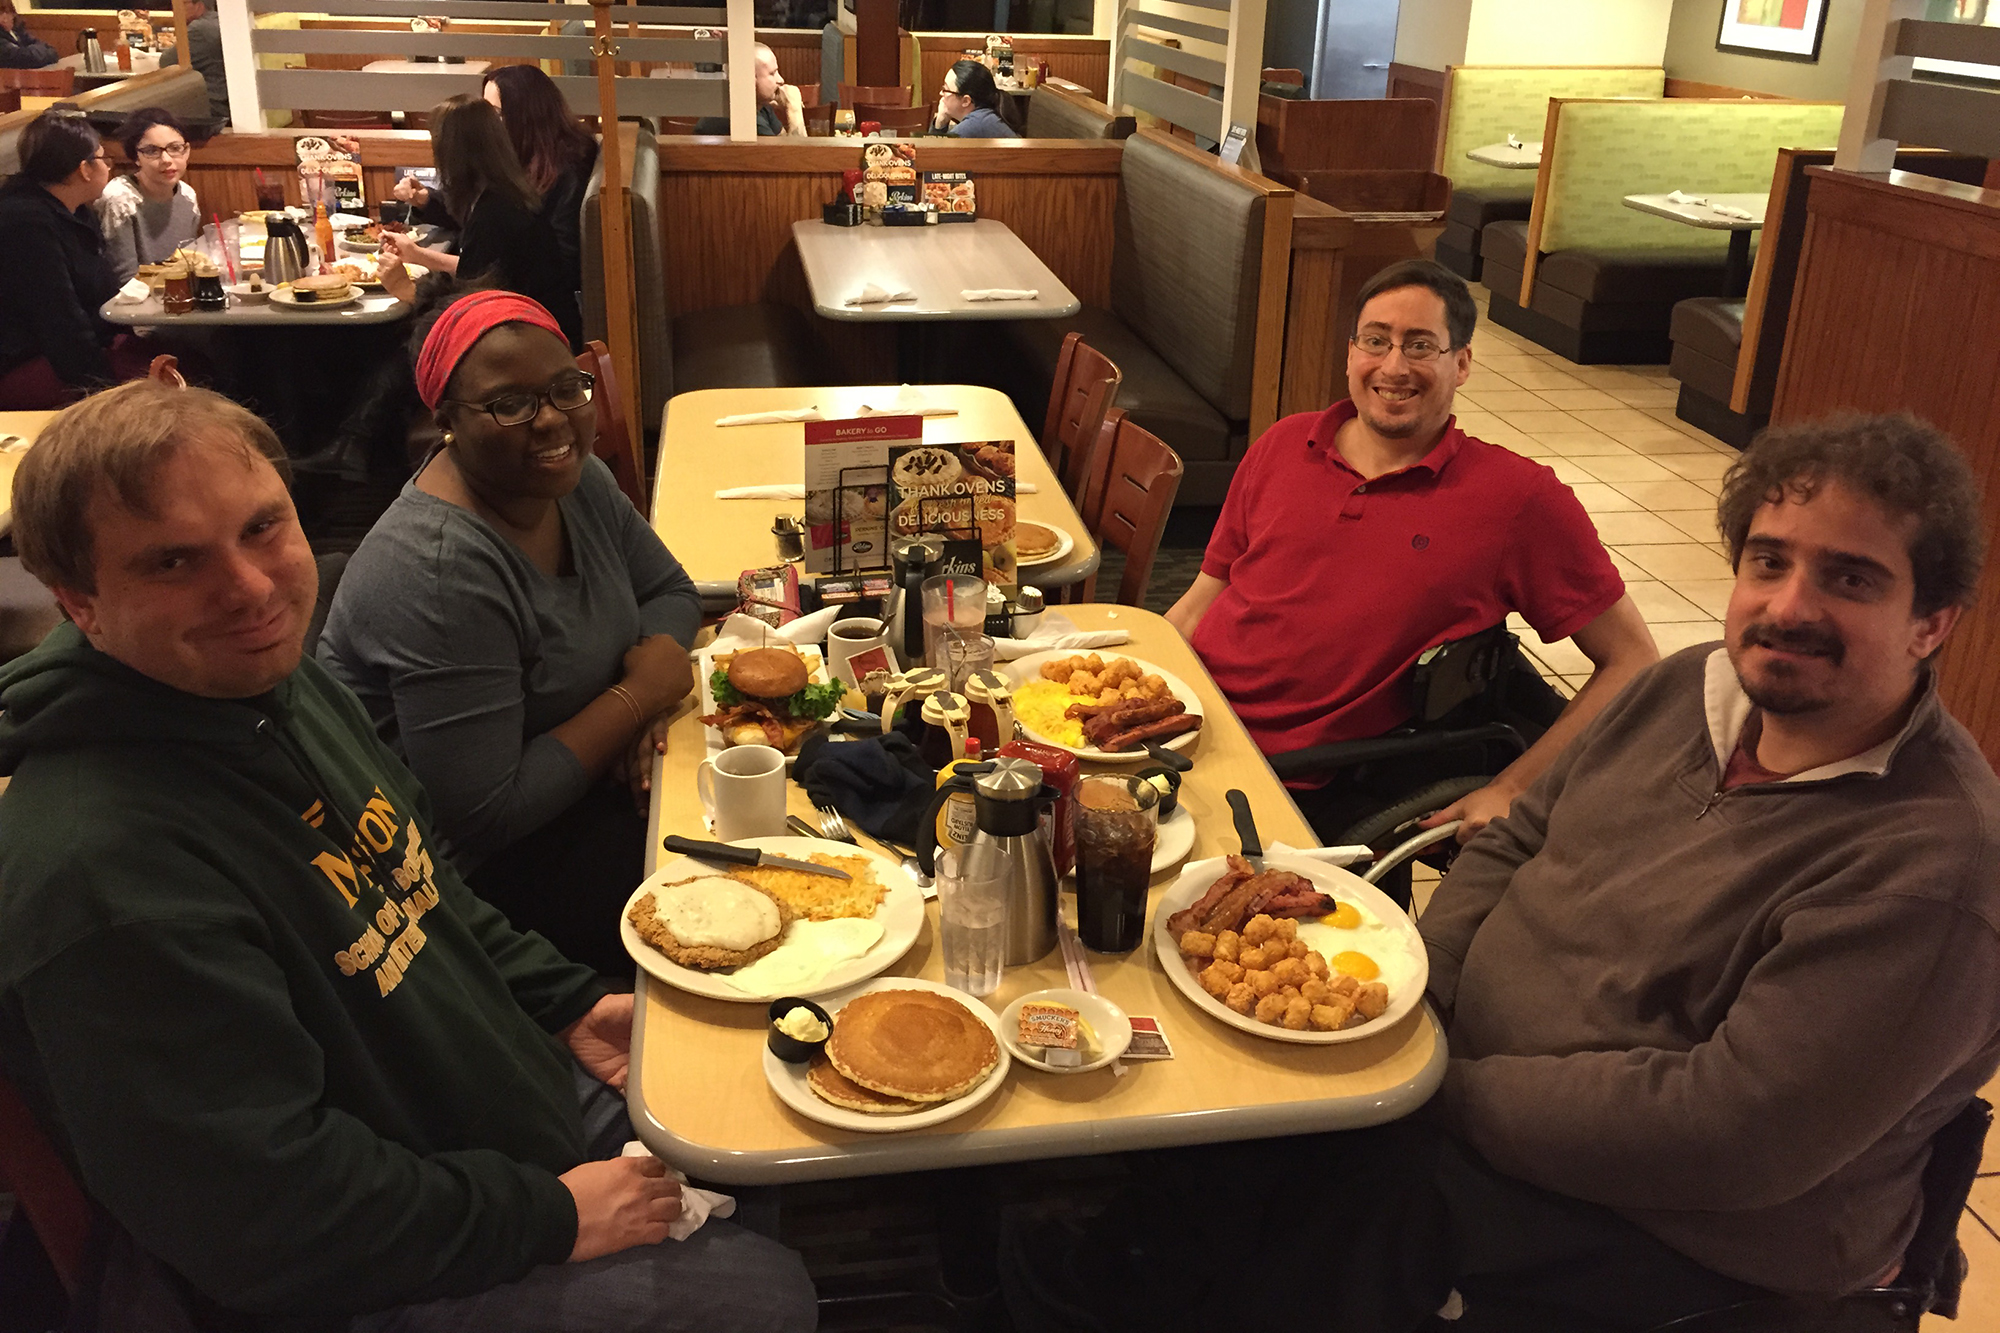 In January, James and his teammates enjoyed dinner at a diner in Des Moines, Iowa.